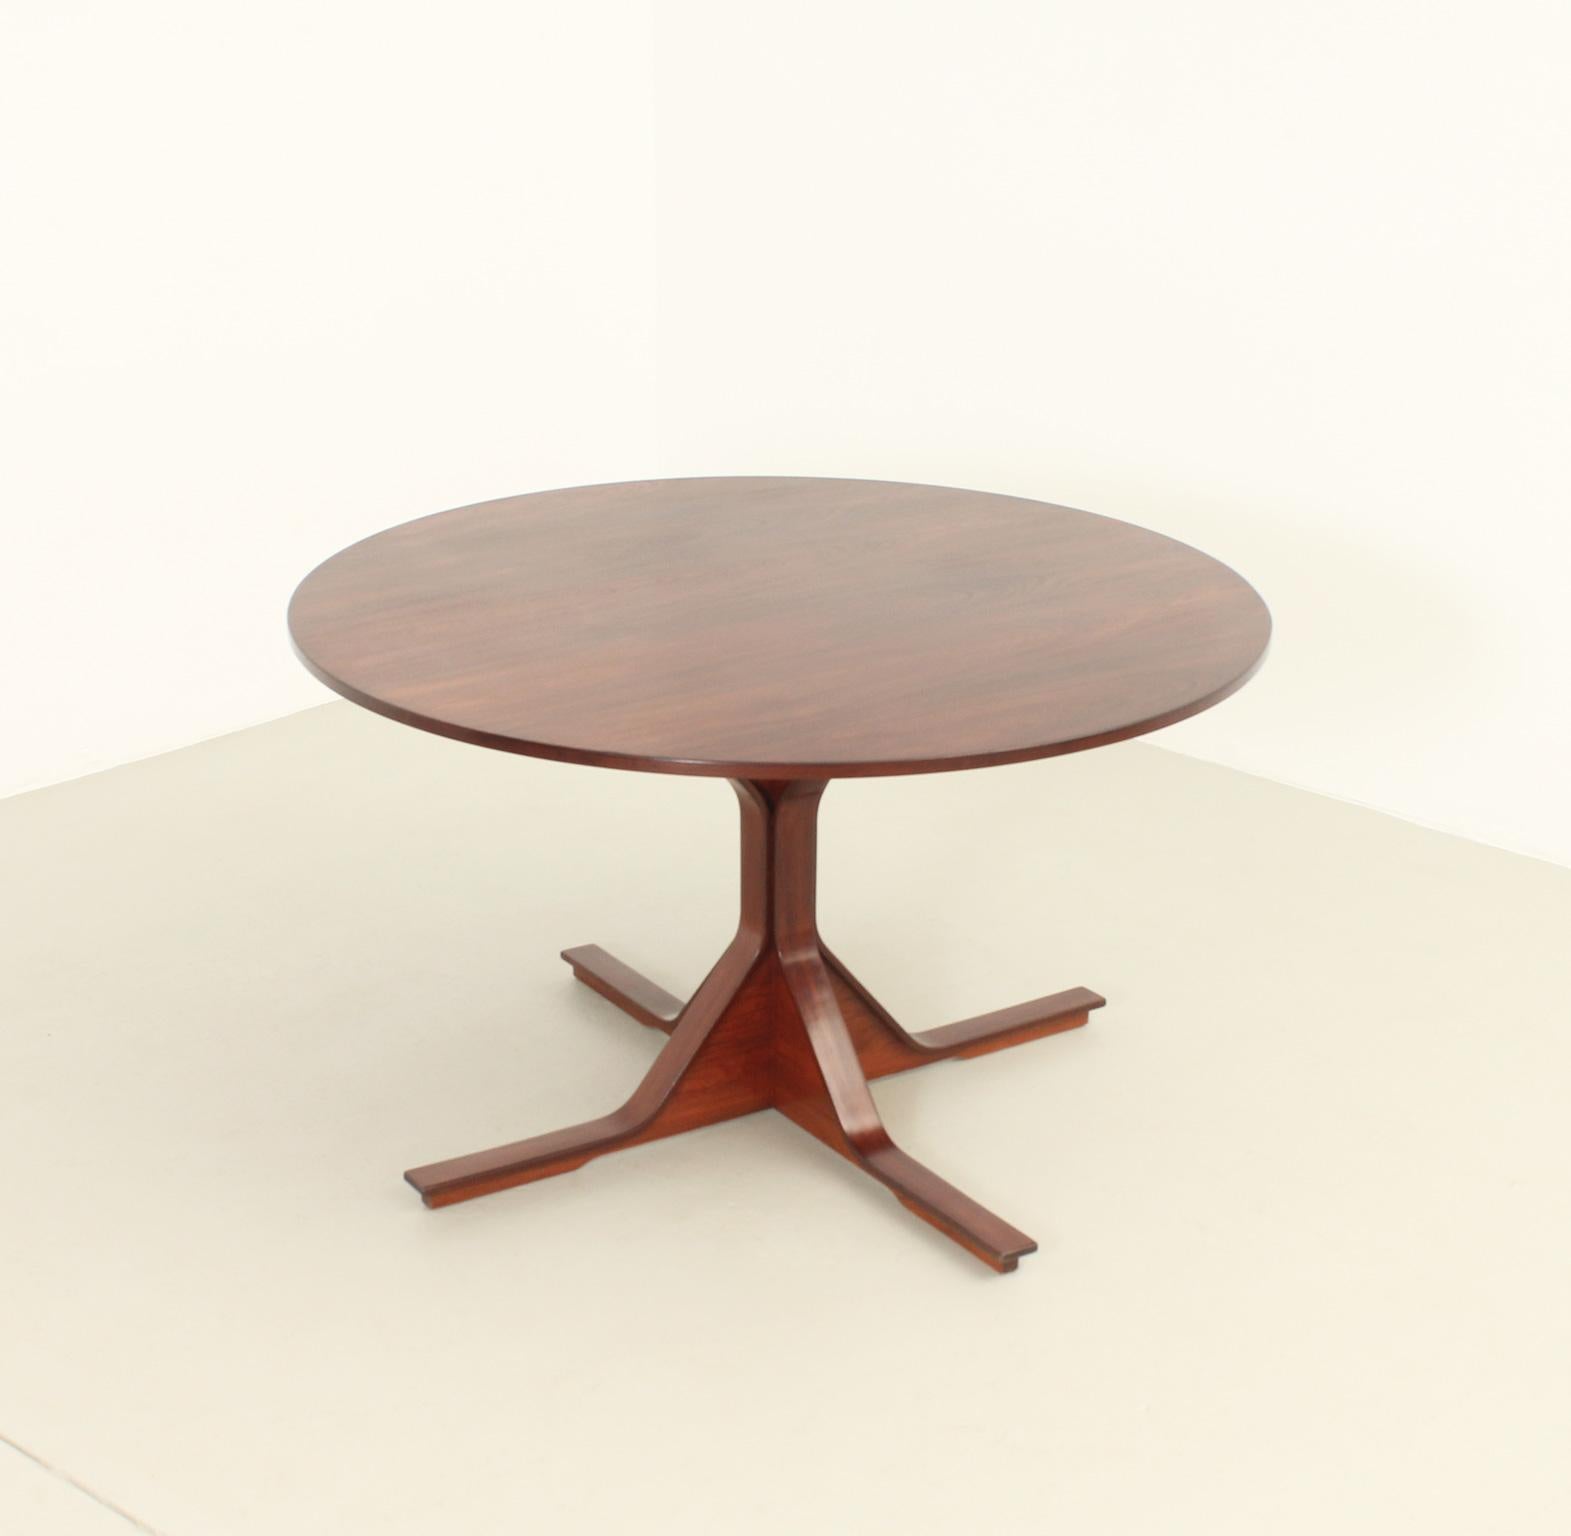 Mid-Century Modern Round Dining Table by Gianfranco Frattini for Bernini, Italy, 1960